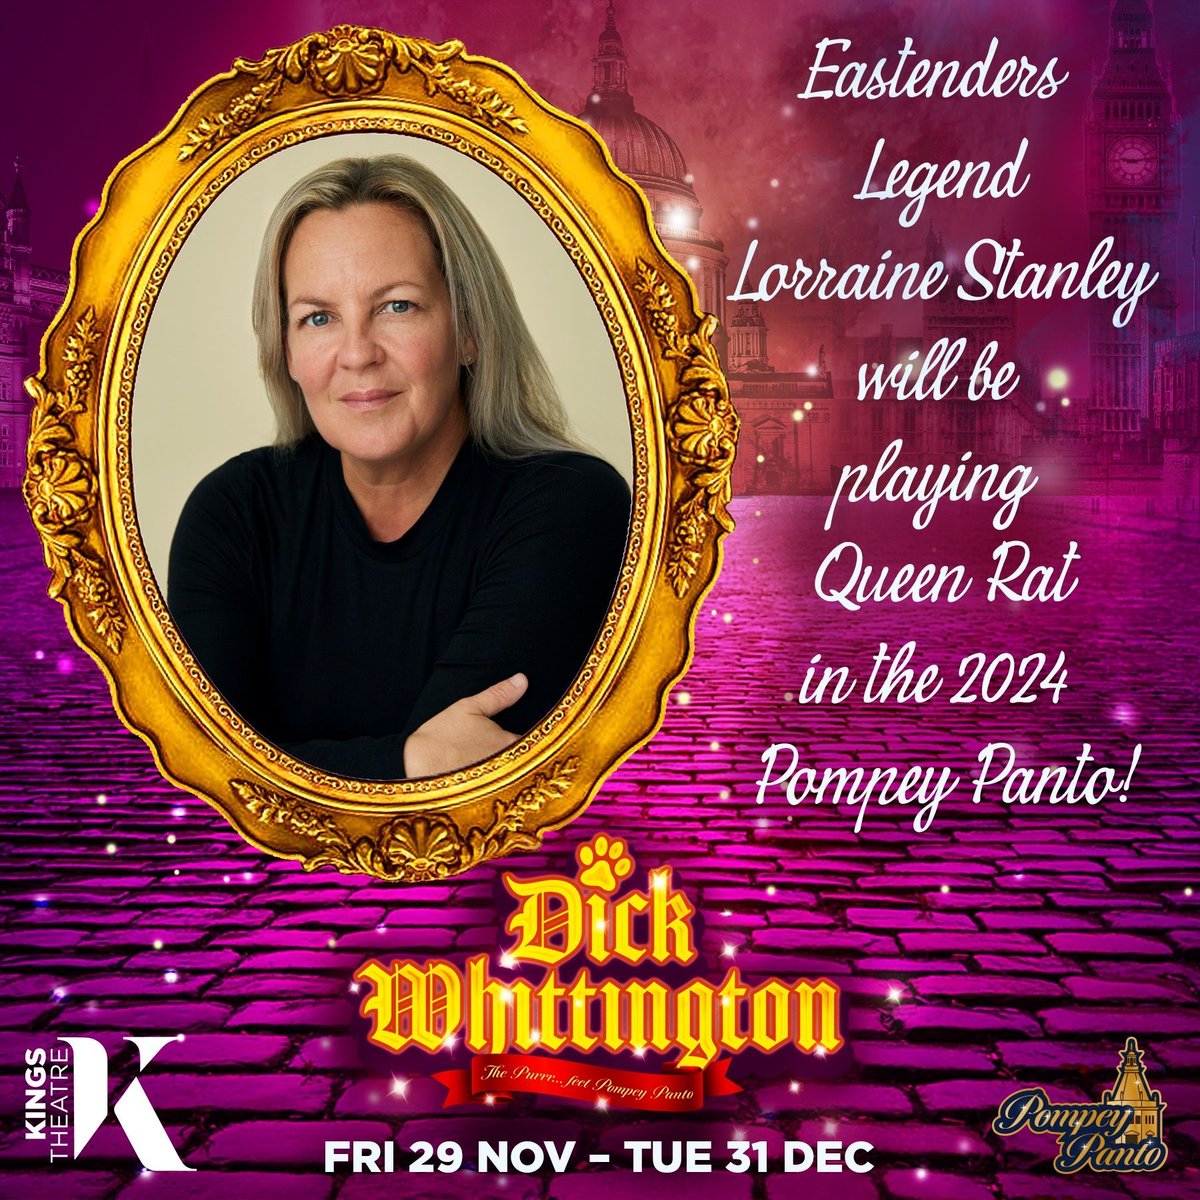 THE RAT'S OUT OF THE BAG! 🐀 We're delighted to announce that Portsmouth's own LORRAINE STANLEY will be playing the evil Queen Rat in this year's #PompeyPanto Dick Whittington! 📅 Fri 29 Nov - Tue 31 Dec 🎟️ Tickets from £10 ➡️ buff.ly/44FZ3mF